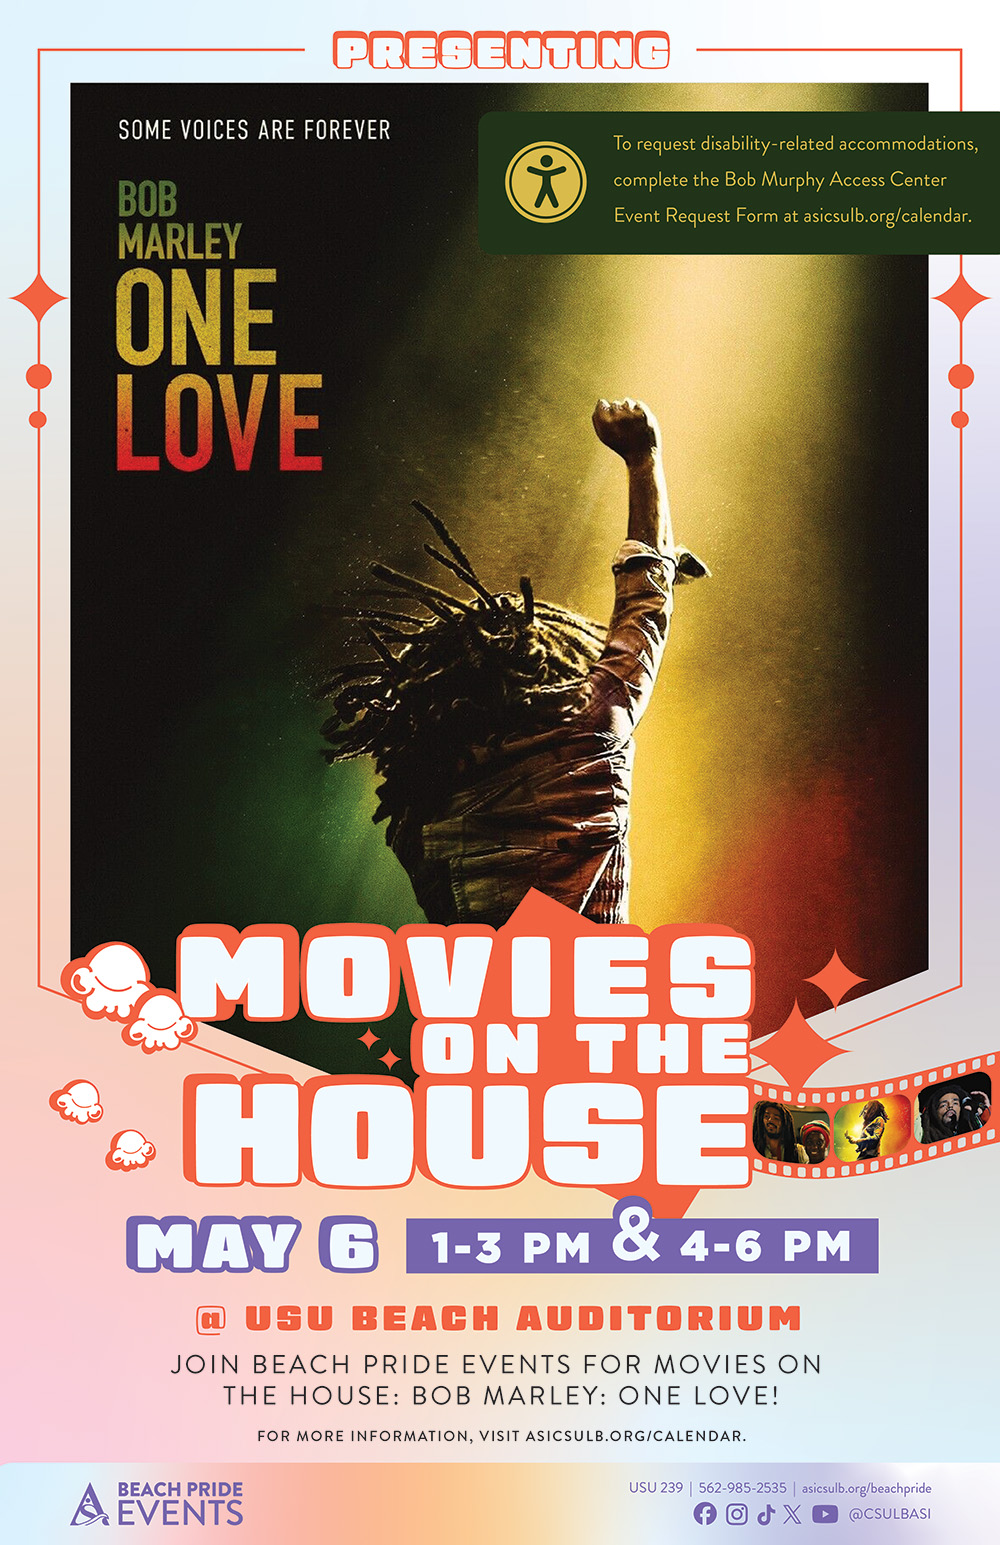 Movies on the House May 6 From 1 - 3 and 4 - 6 in the USU Beach Auditorium